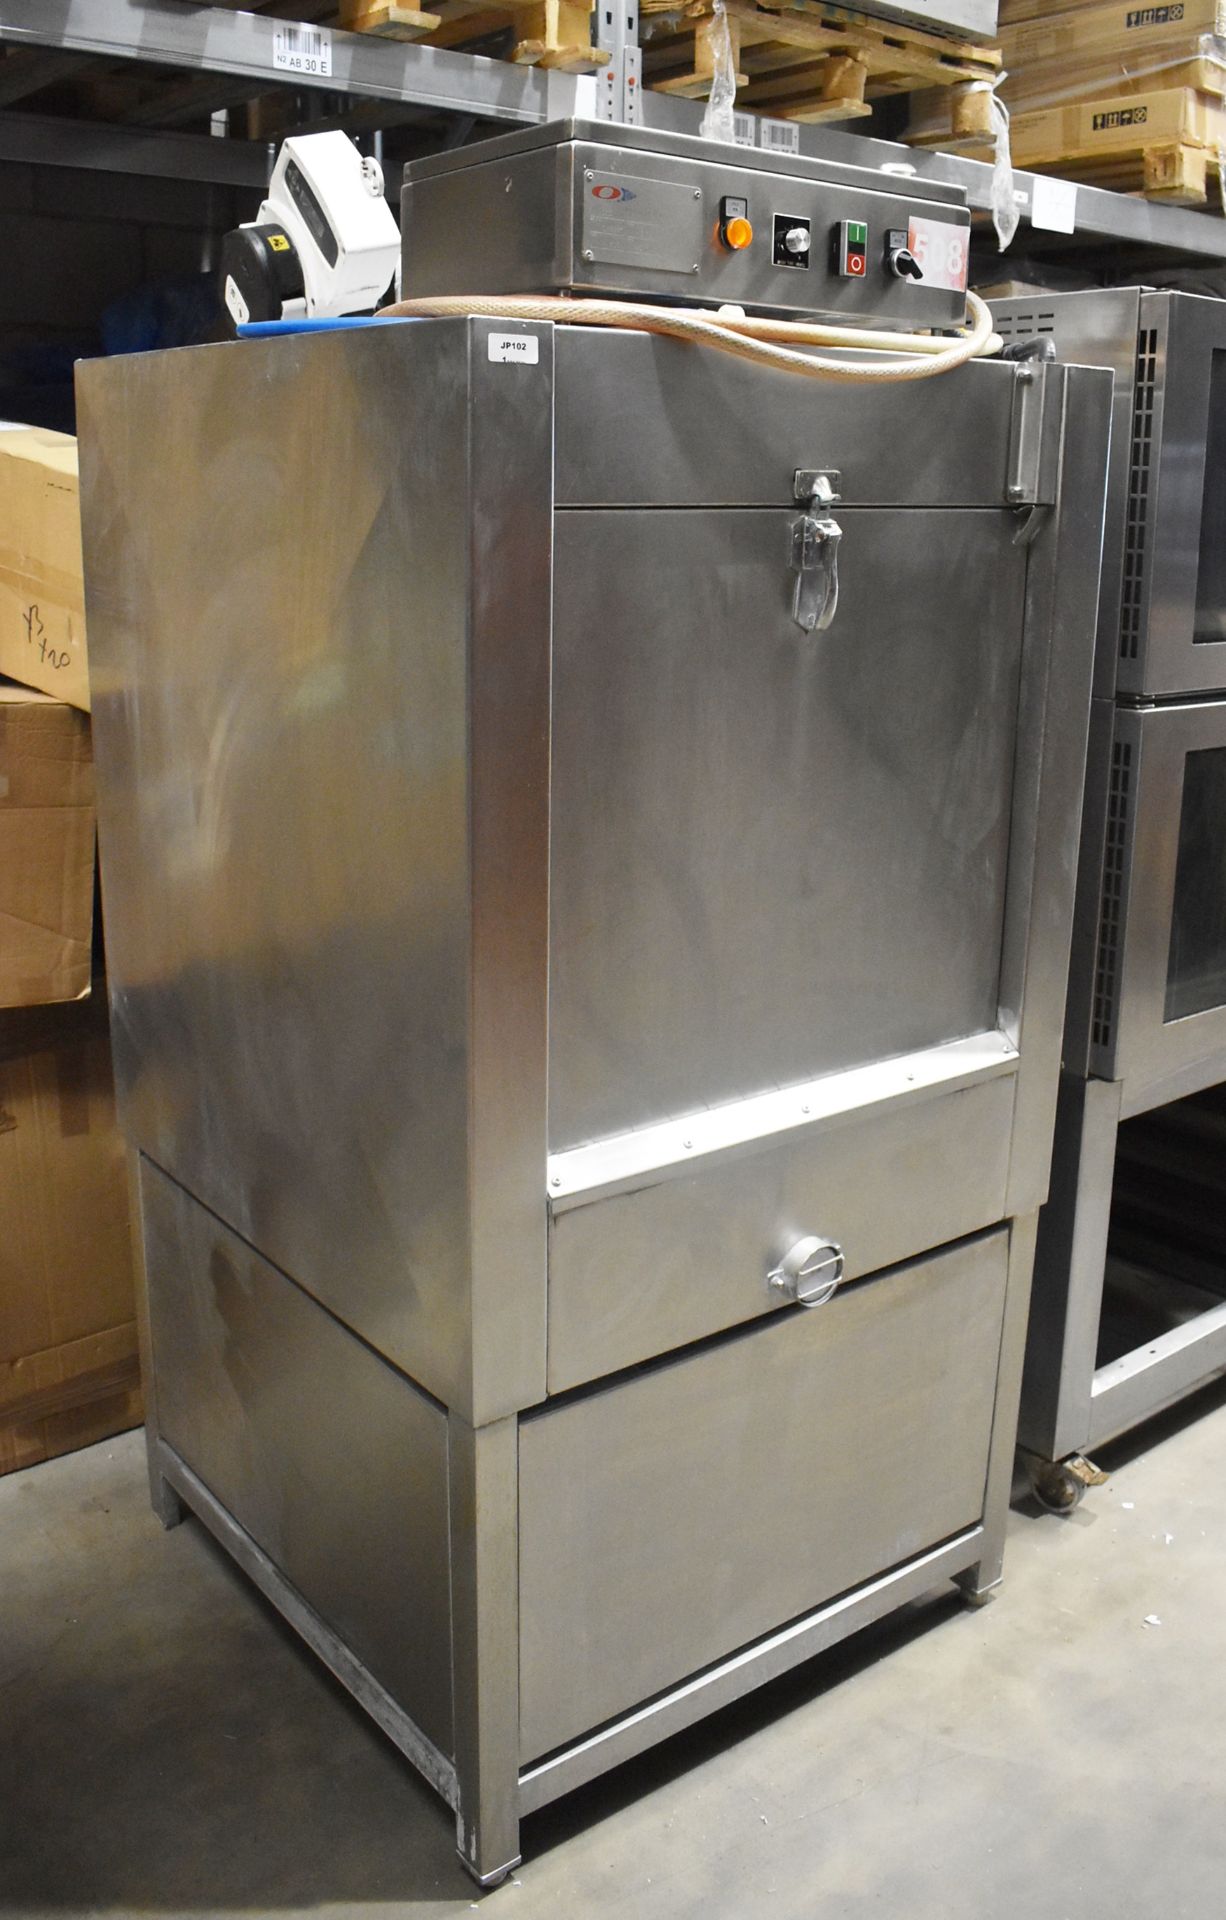 1 x Oliver Douglas Panamatic 500 Industrial Washing Machine For Commercial Kitchen Environments - St - Image 4 of 15